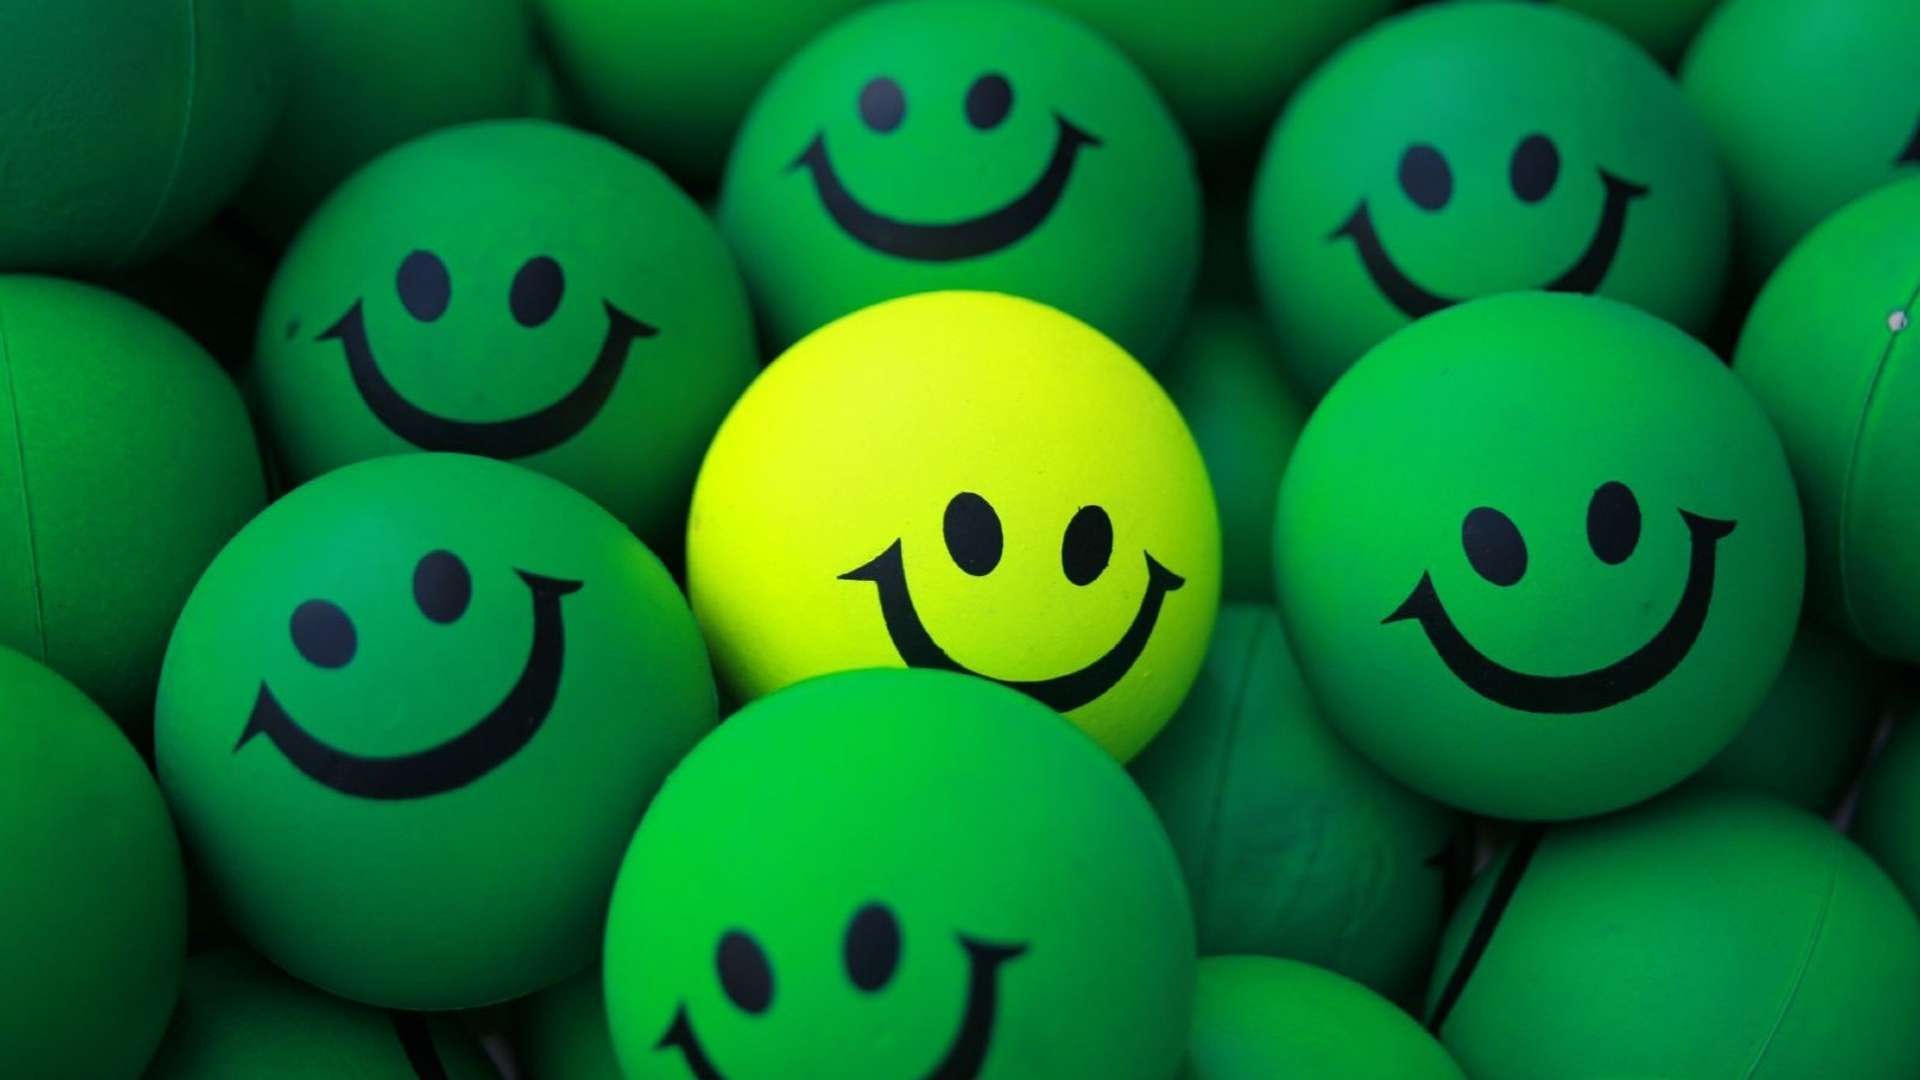 hd wallpaper for mobile 1920x1080,green,facial expression,smile,yellow,emoticon